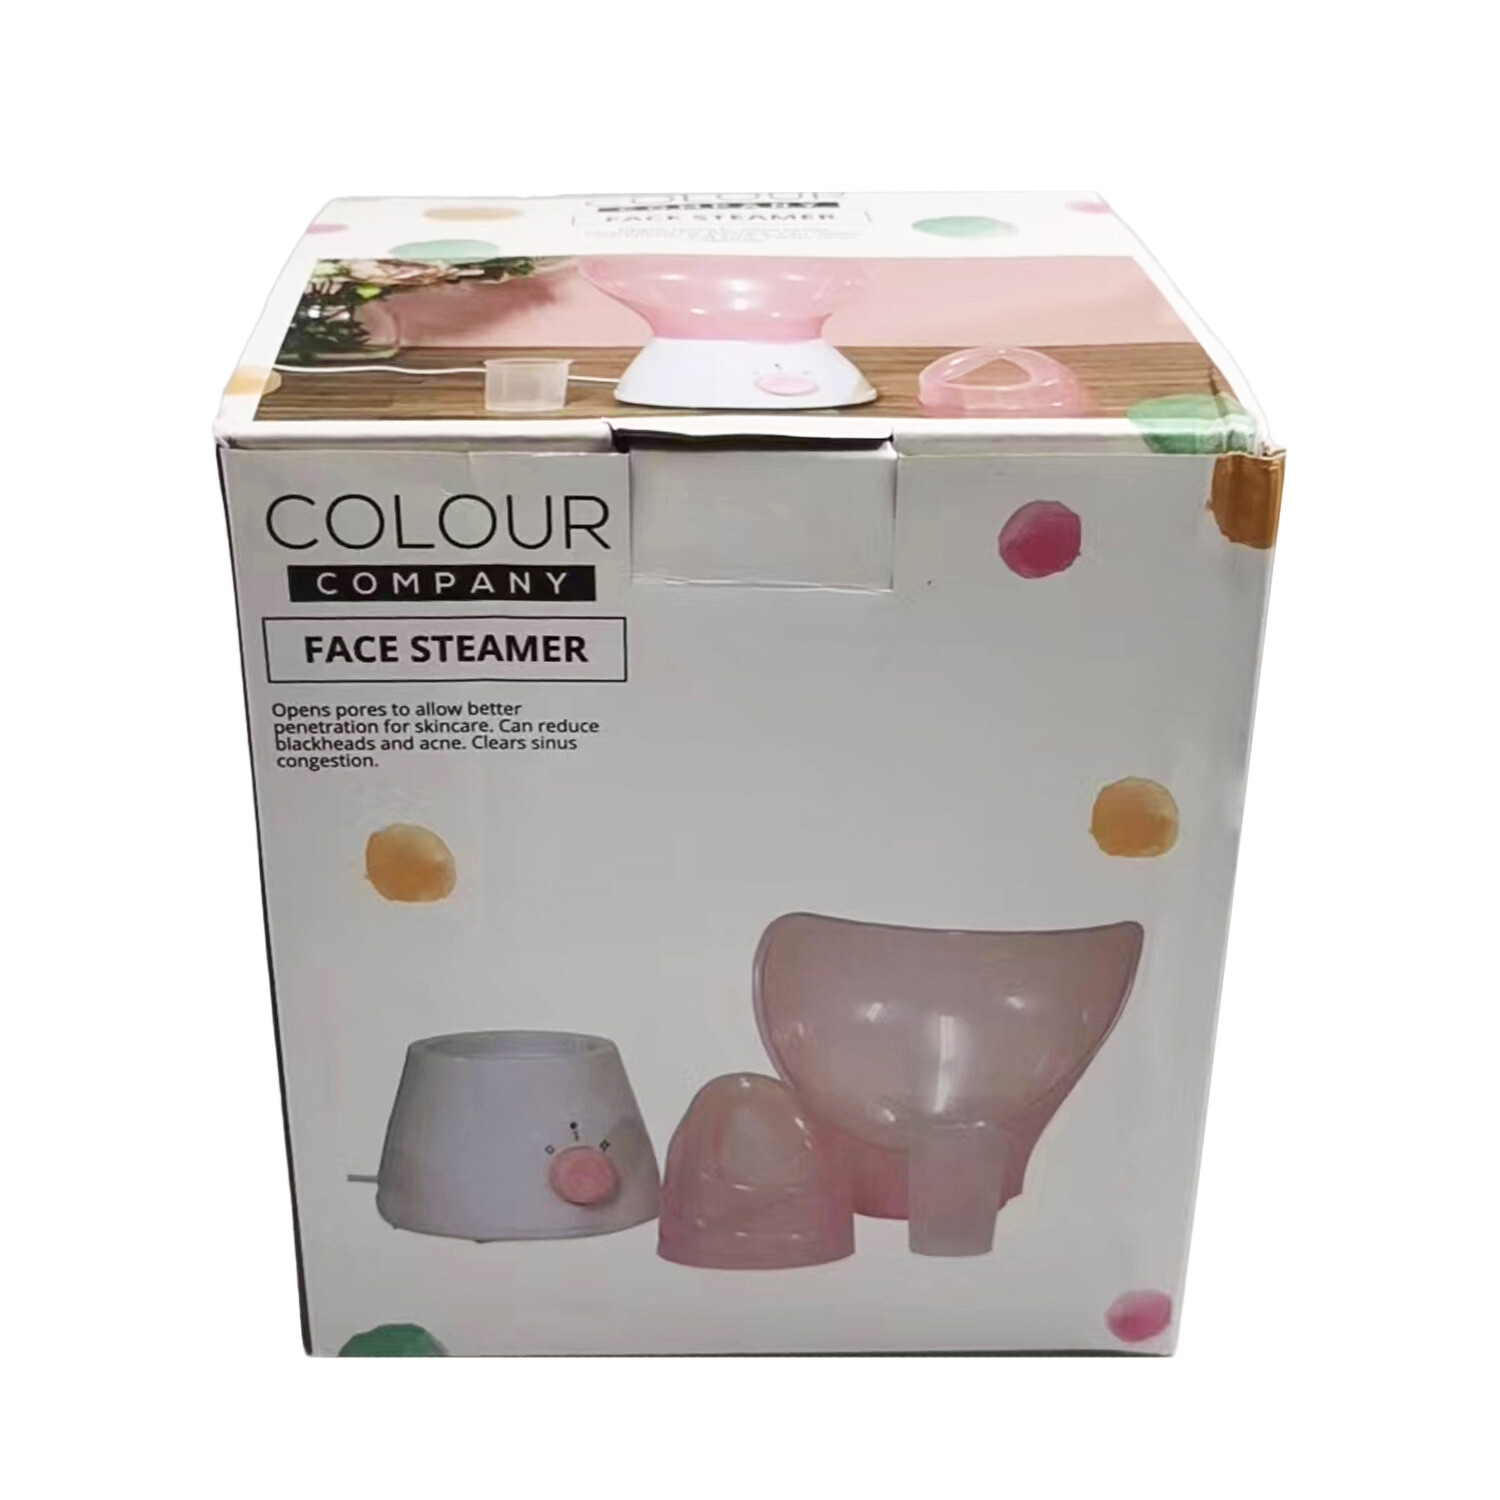 Colour Company Pink Face Steamer Image 4